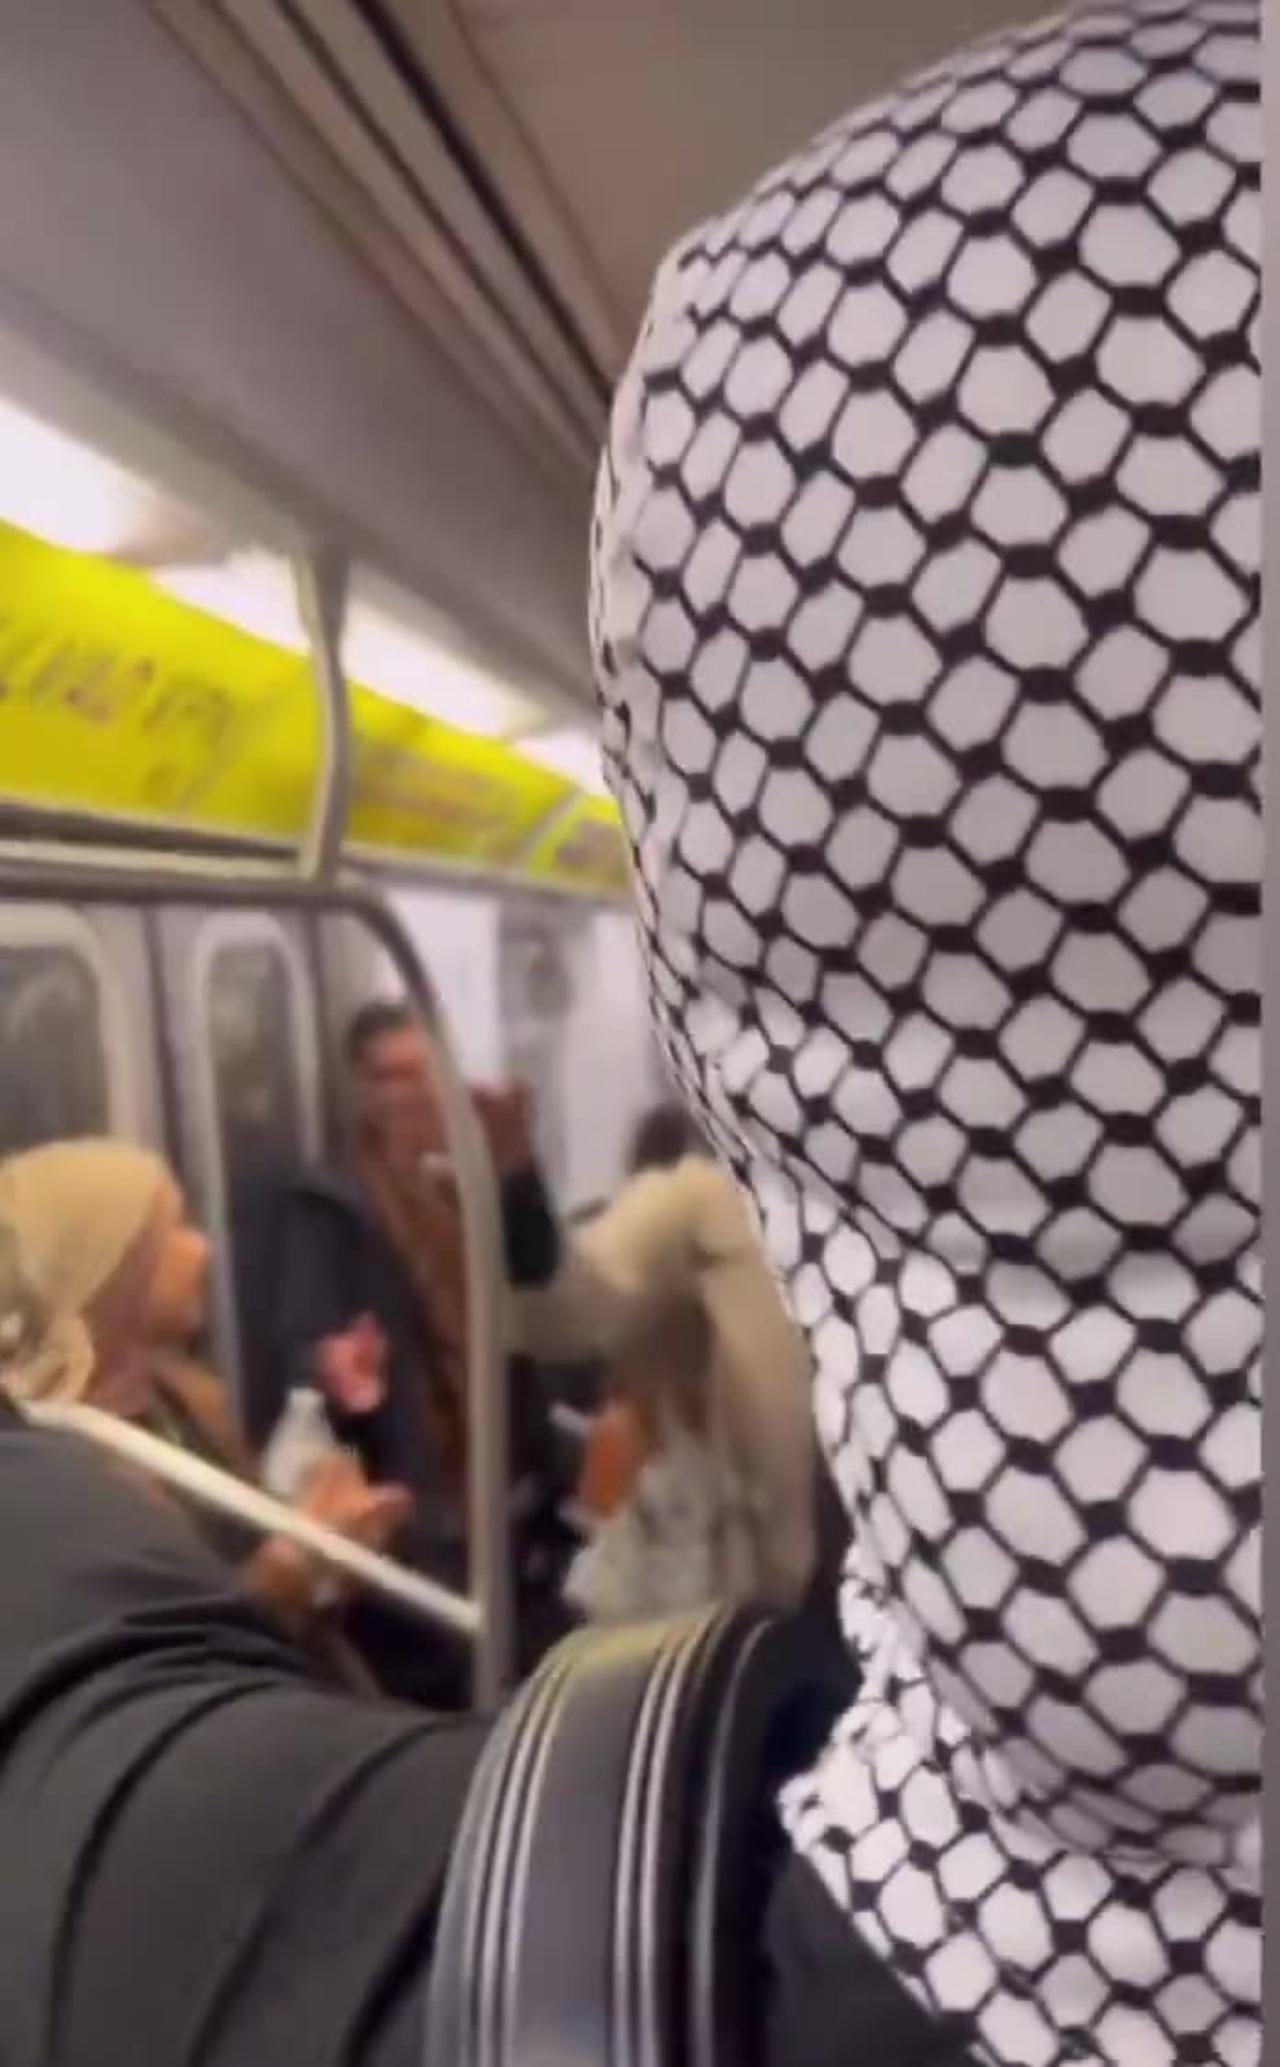 Palestinian activists call for Jewish genocide on the NYC Metro.